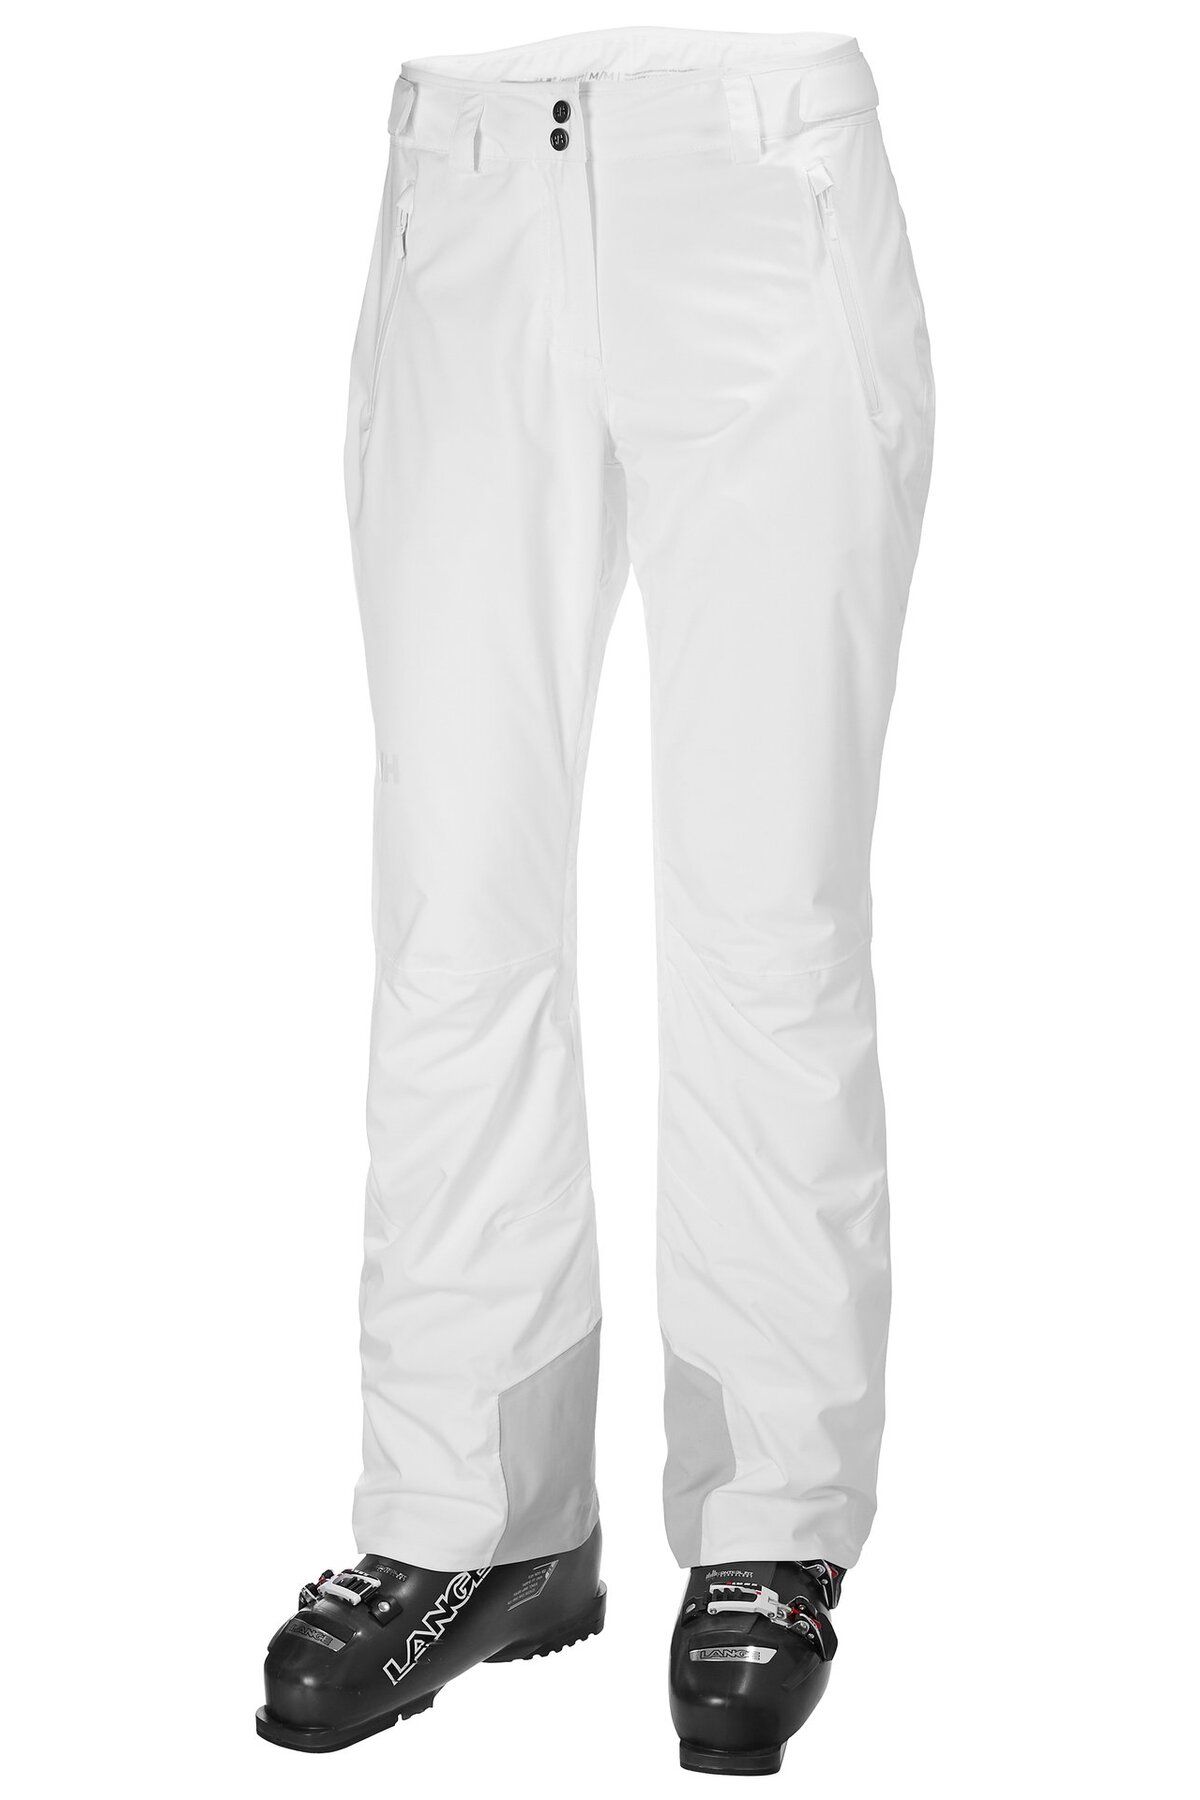 Helly Hansen Hh W Legendary Insulated Pant